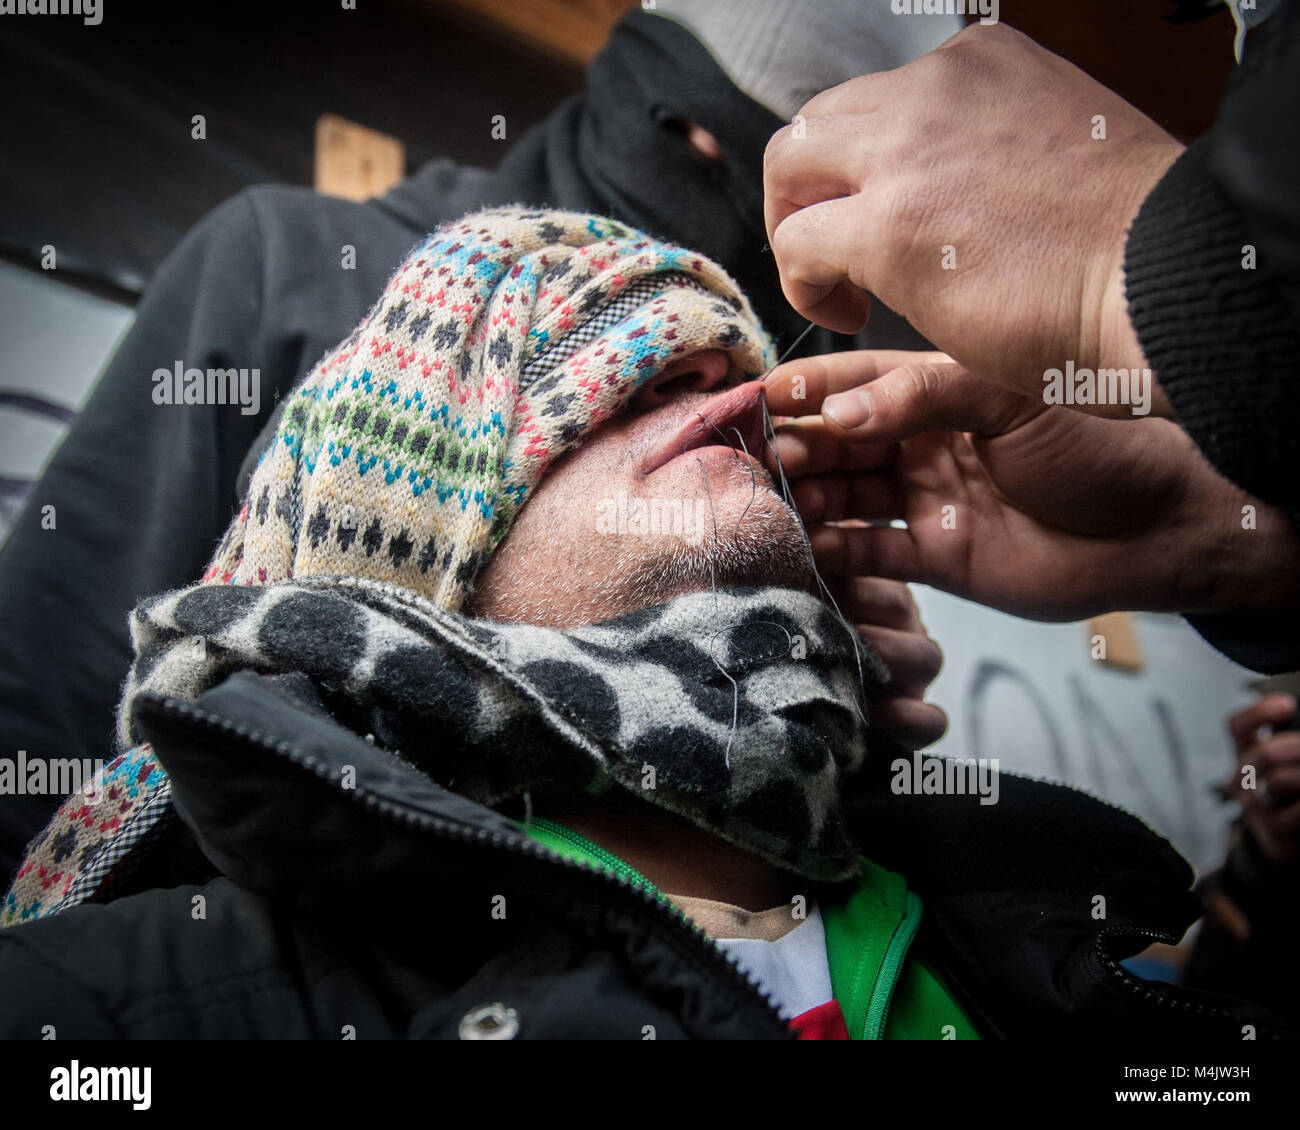 Jungle, Calais, France. 03 March, 2016. A desperate Iranian refugee has his mouth sown shut in order to signify that the voices of people living in the Calais Jungle are not being heard as the demolition continues. The man was then joined by other refugees and protested in front of riot police and bulldozers. Stock Photo